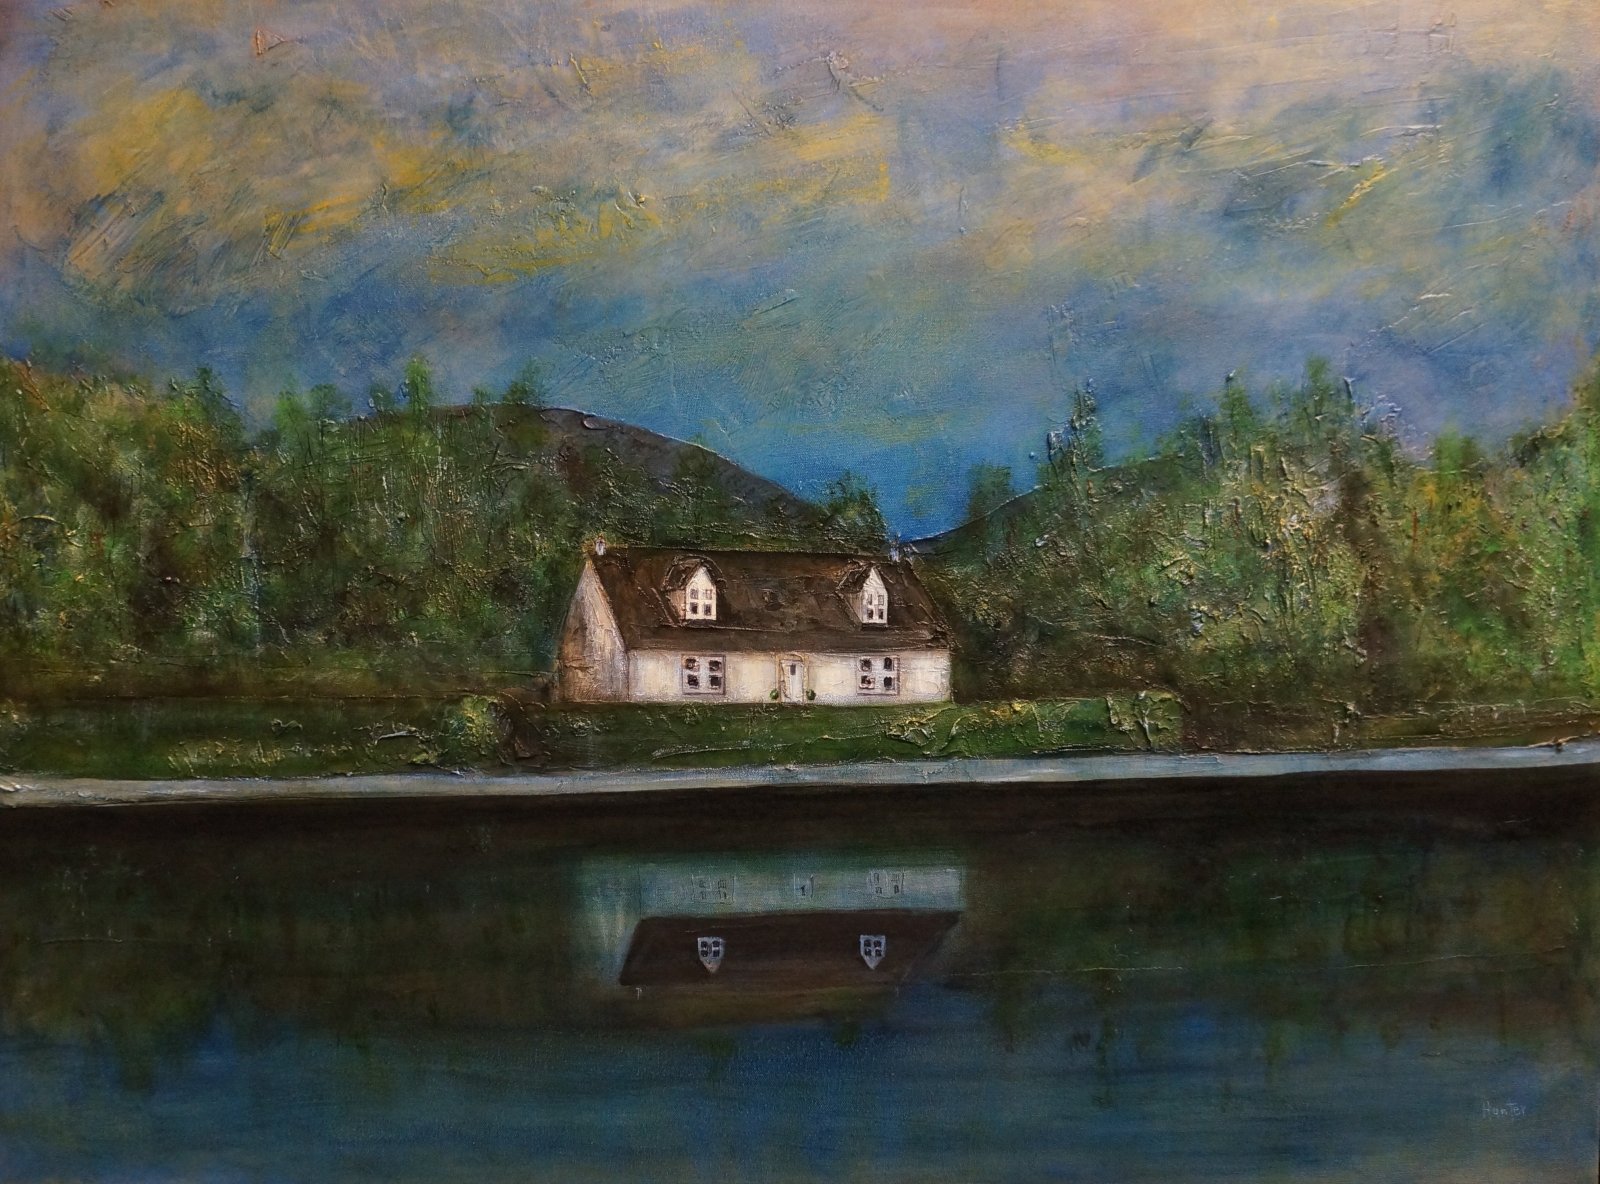 A Loch Lomond Cottage-Signed Art Prints By Scottish Artist Hunter-Scottish Lochs & Mountains Art Gallery-Paintings, Prints, Homeware, Art Gifts From Scotland By Scottish Artist Kevin Hunter